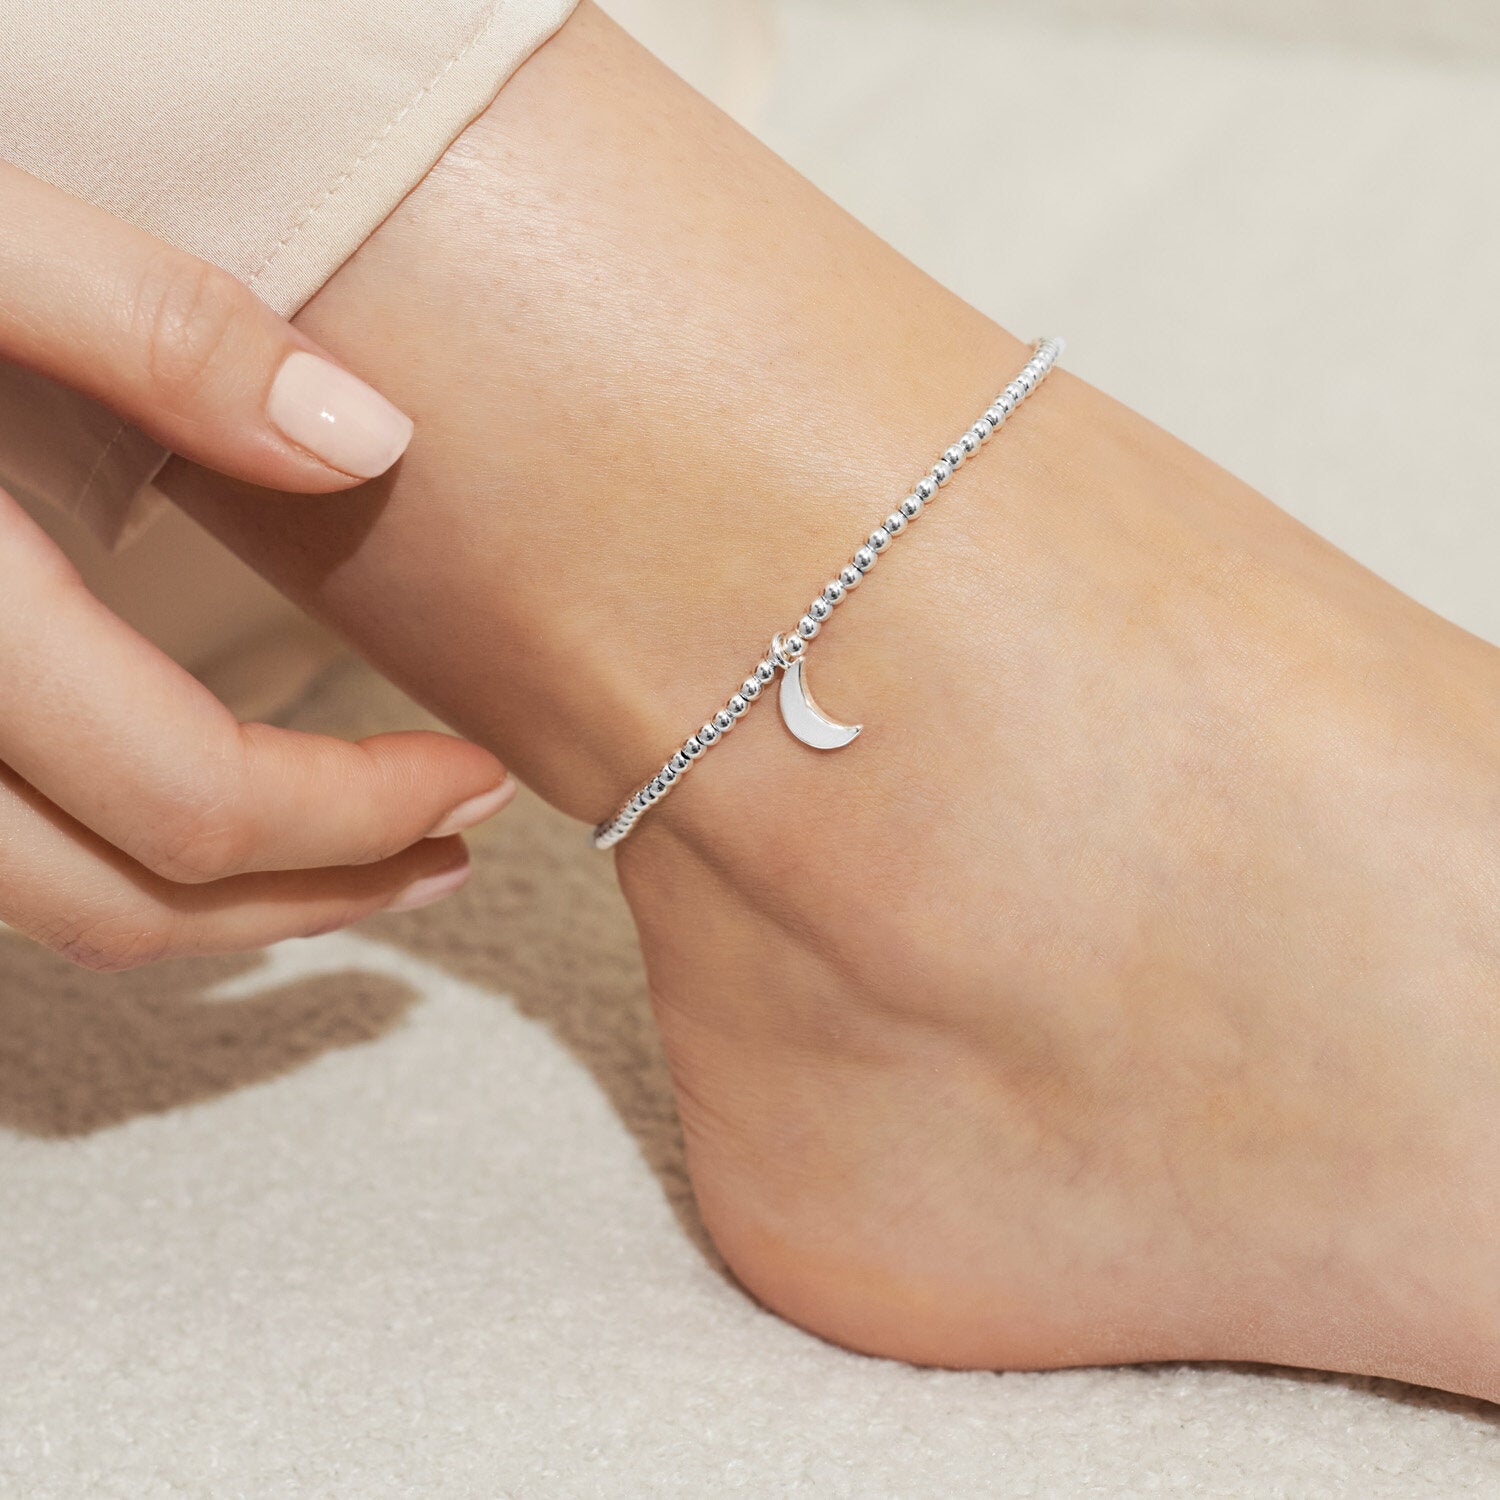 A Littles & Co. Anklet - Silver Moon Circle